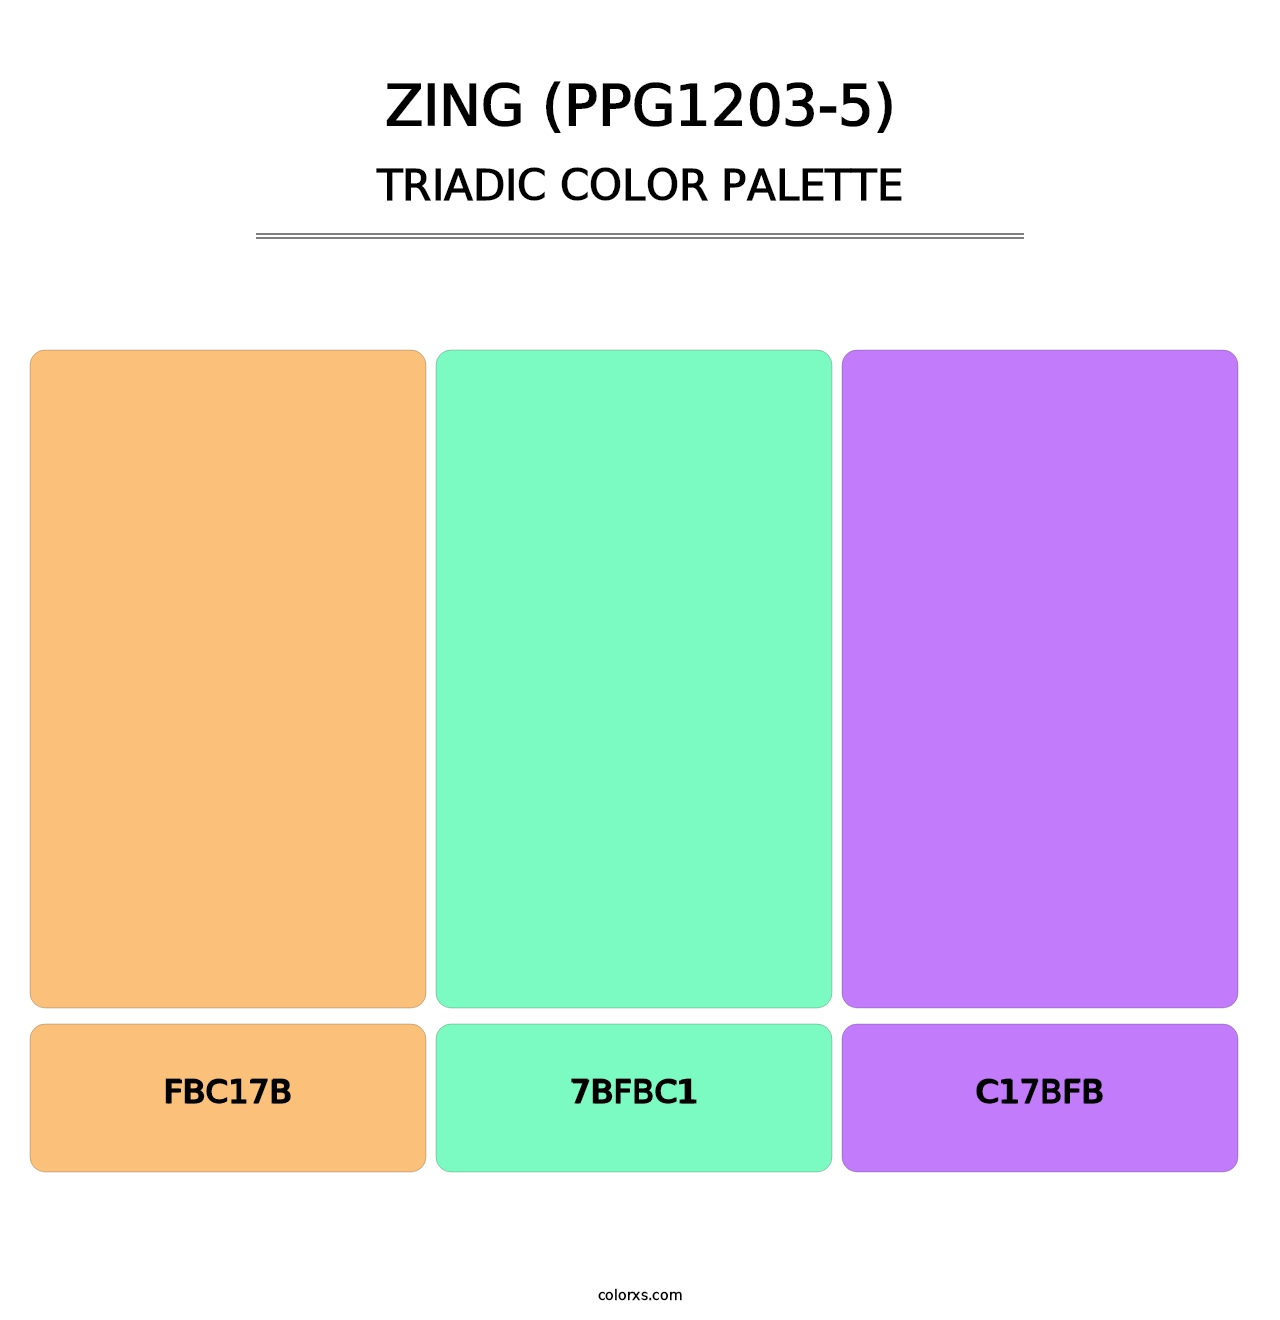 Zing (PPG1203-5) - Triadic Color Palette